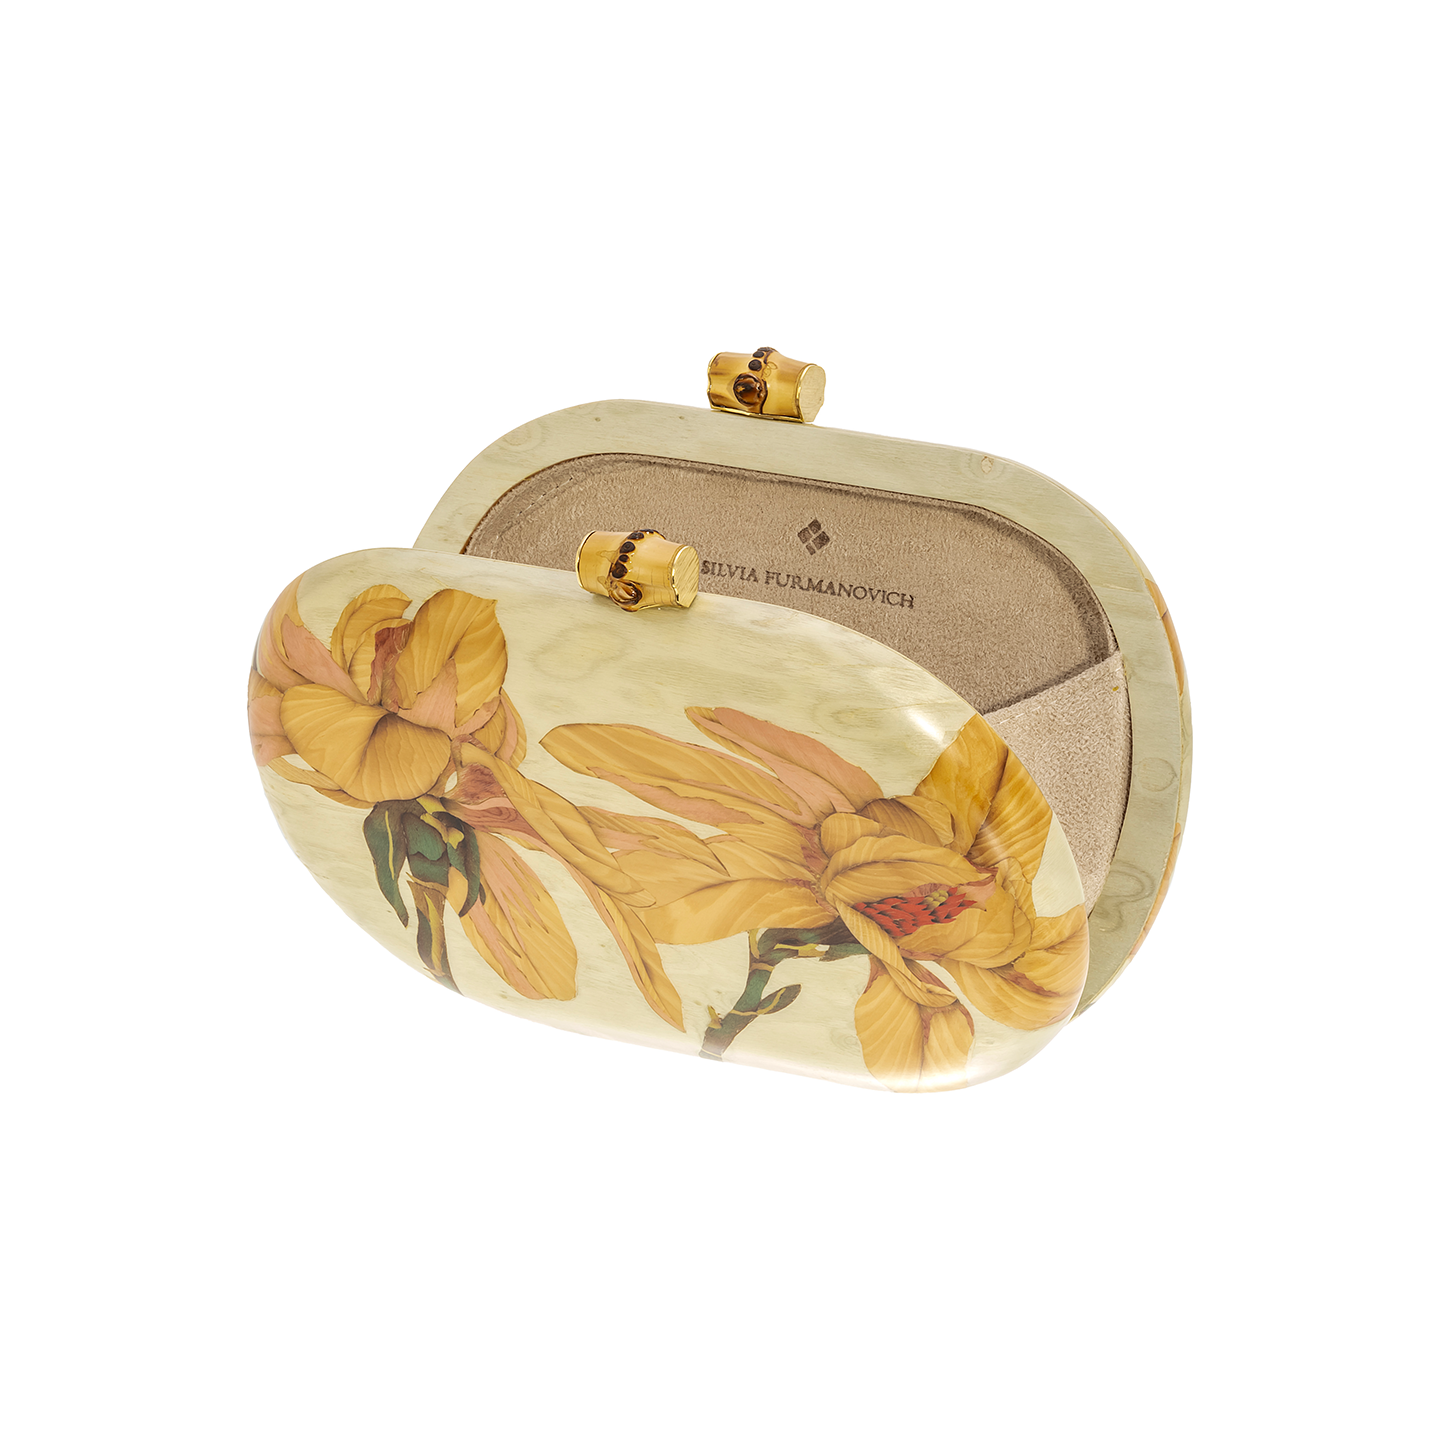 Silvia Furmanovich Marquetry Clutch with Bamboo and Floral Pattern